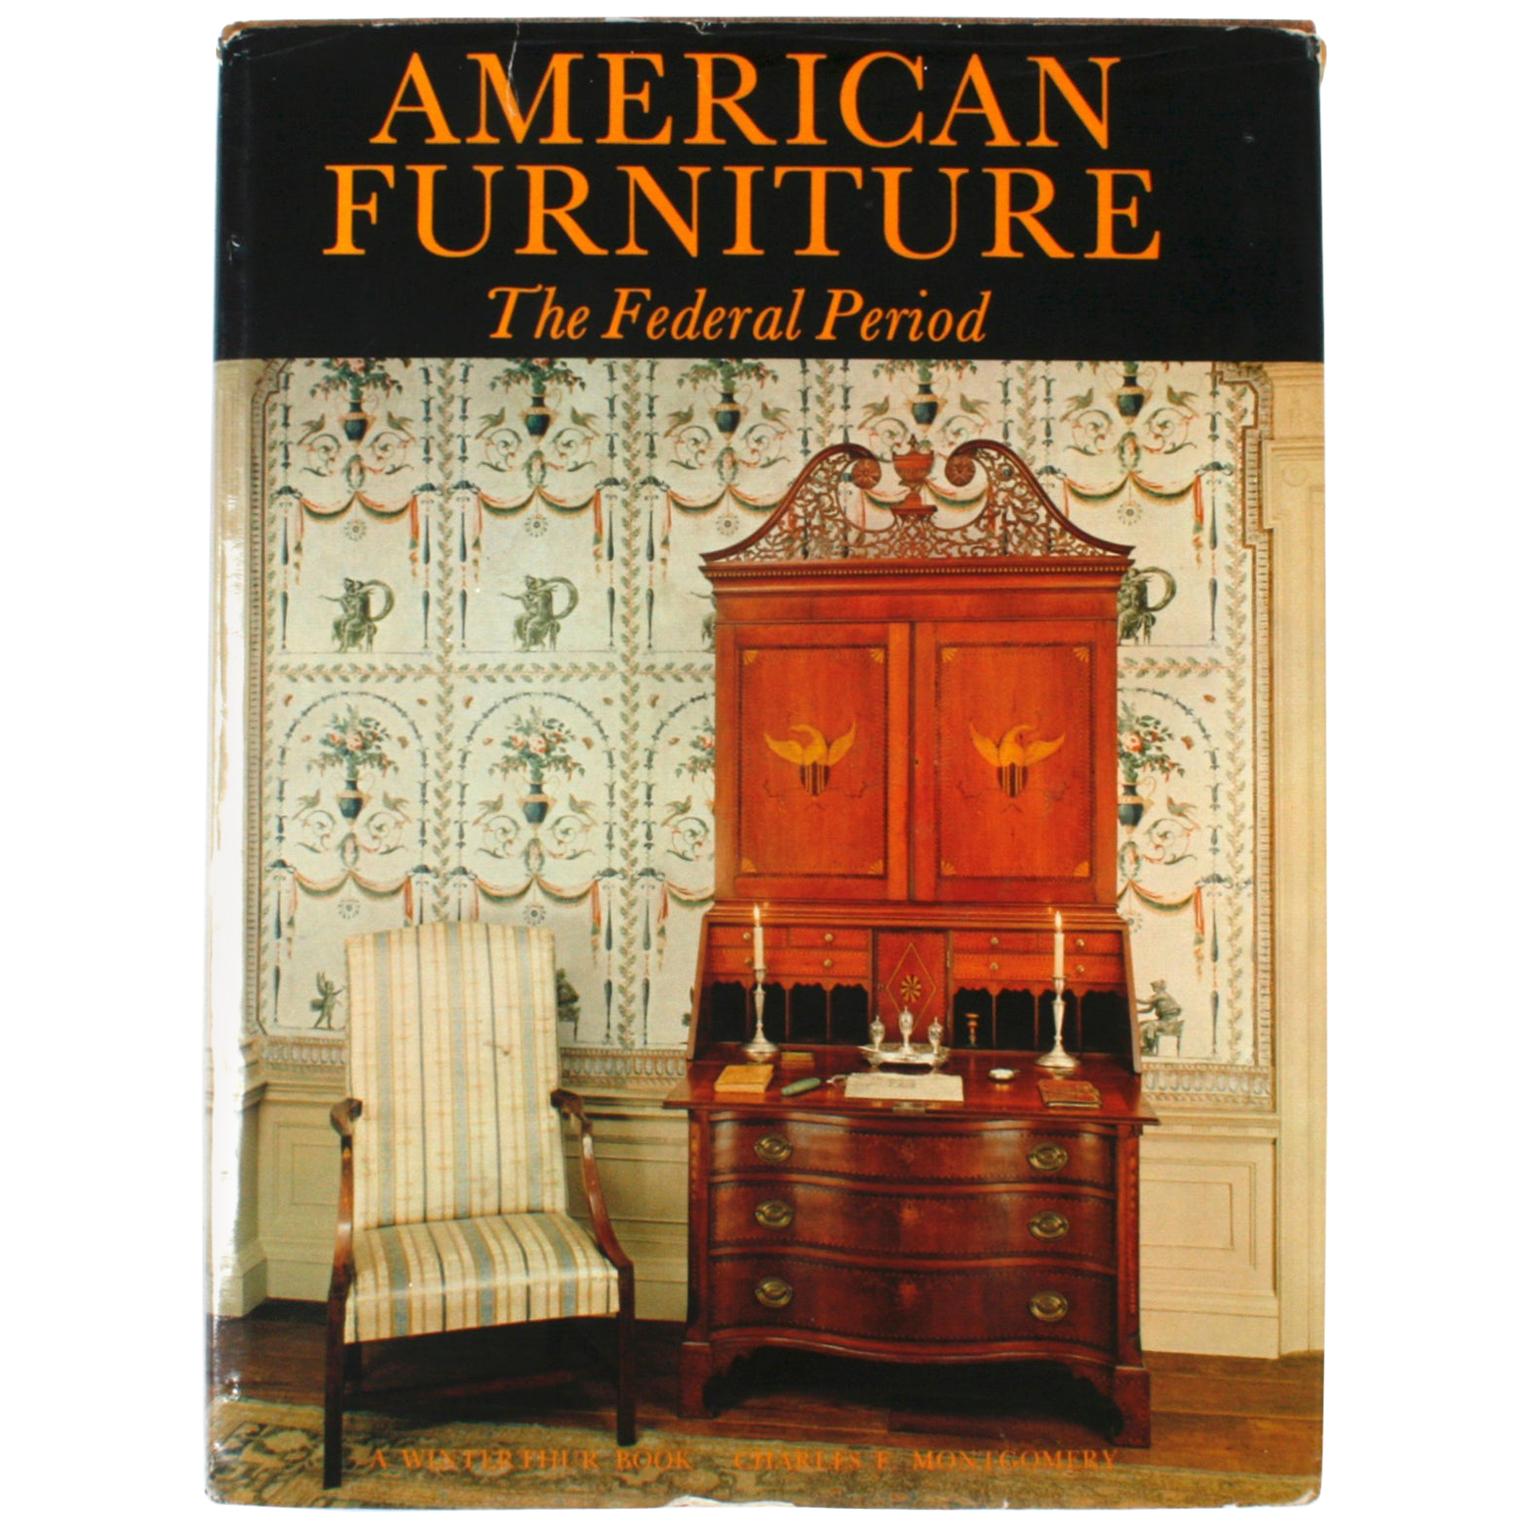 American Furniture, The Federal Period by Charles F. Montgomery For Sale